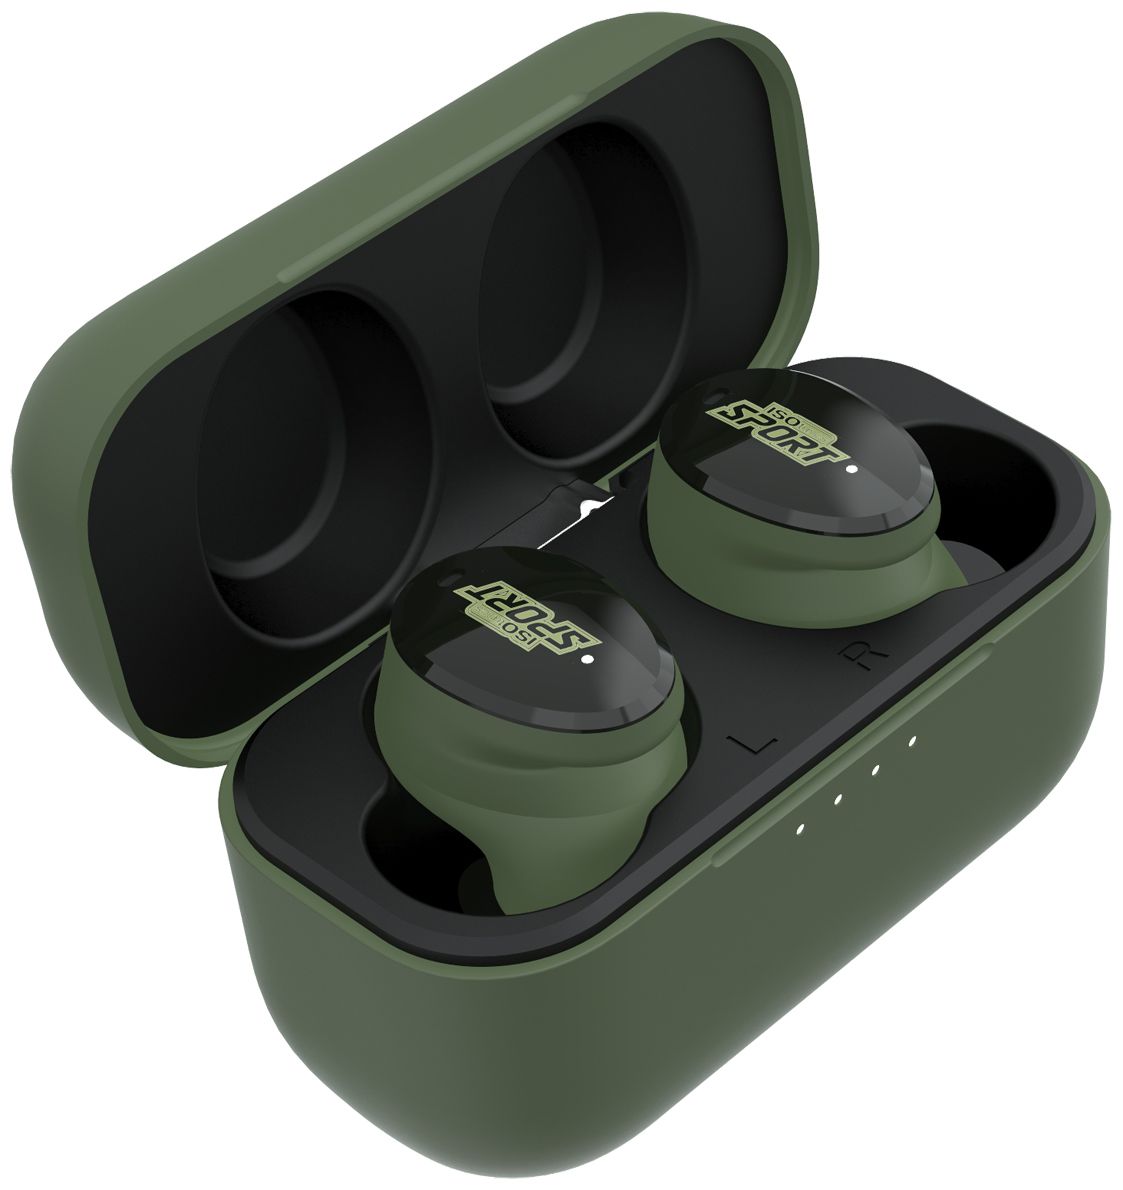 ISOtunes Caliber Headset Earbuds - Bluetooth Headphones with Noise Cancelling - SNR: 32 dB - Olive Green